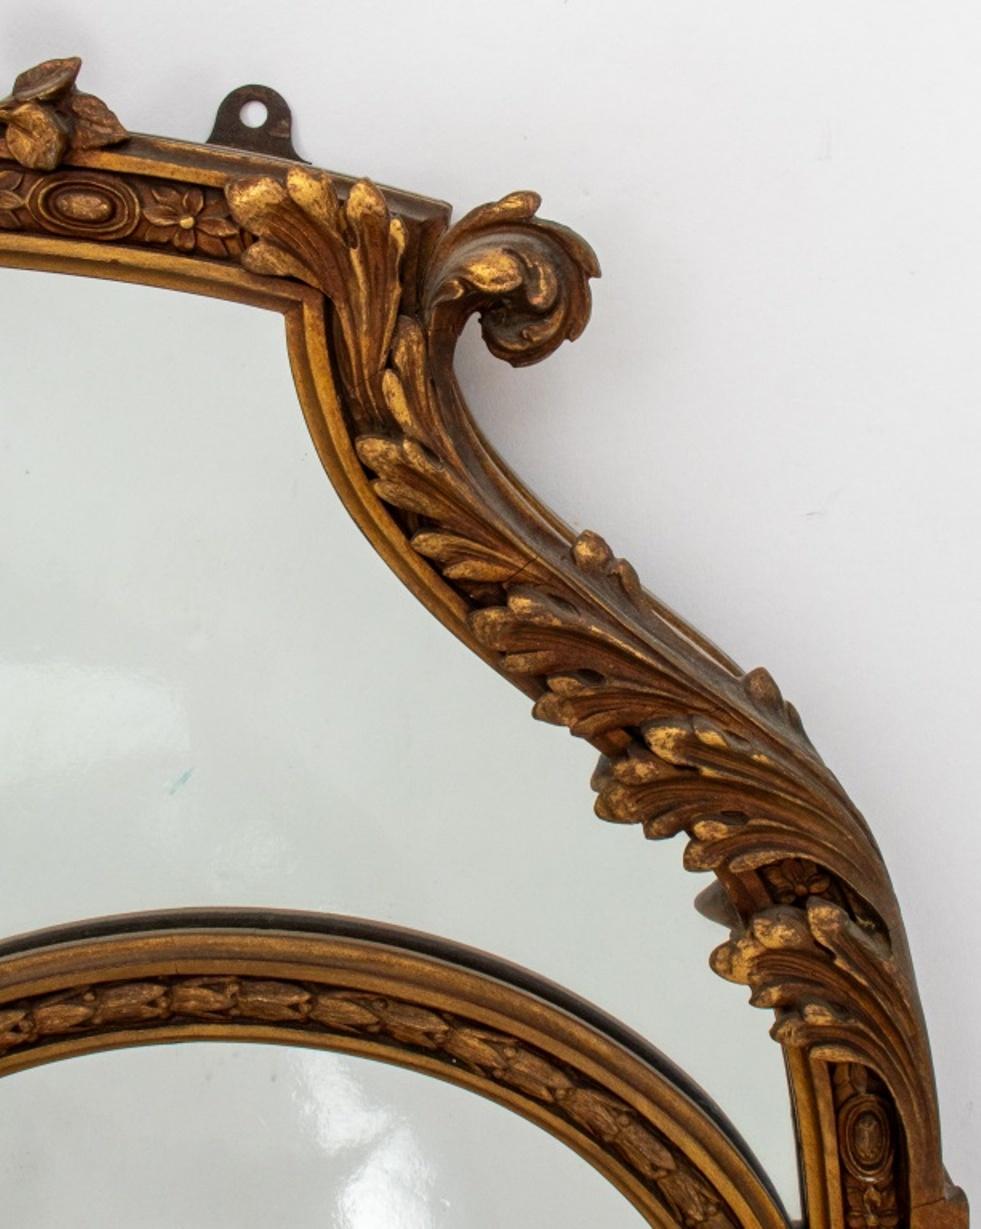 Italian Neoclassical gilt wood mirror, the pediment carved with foliate motifs, surmounted by a bow, and with a ceramic cameo plaque depicting the profile of a female figure on a blue ground, circa early 19th century.

Dimensions for looking glass: